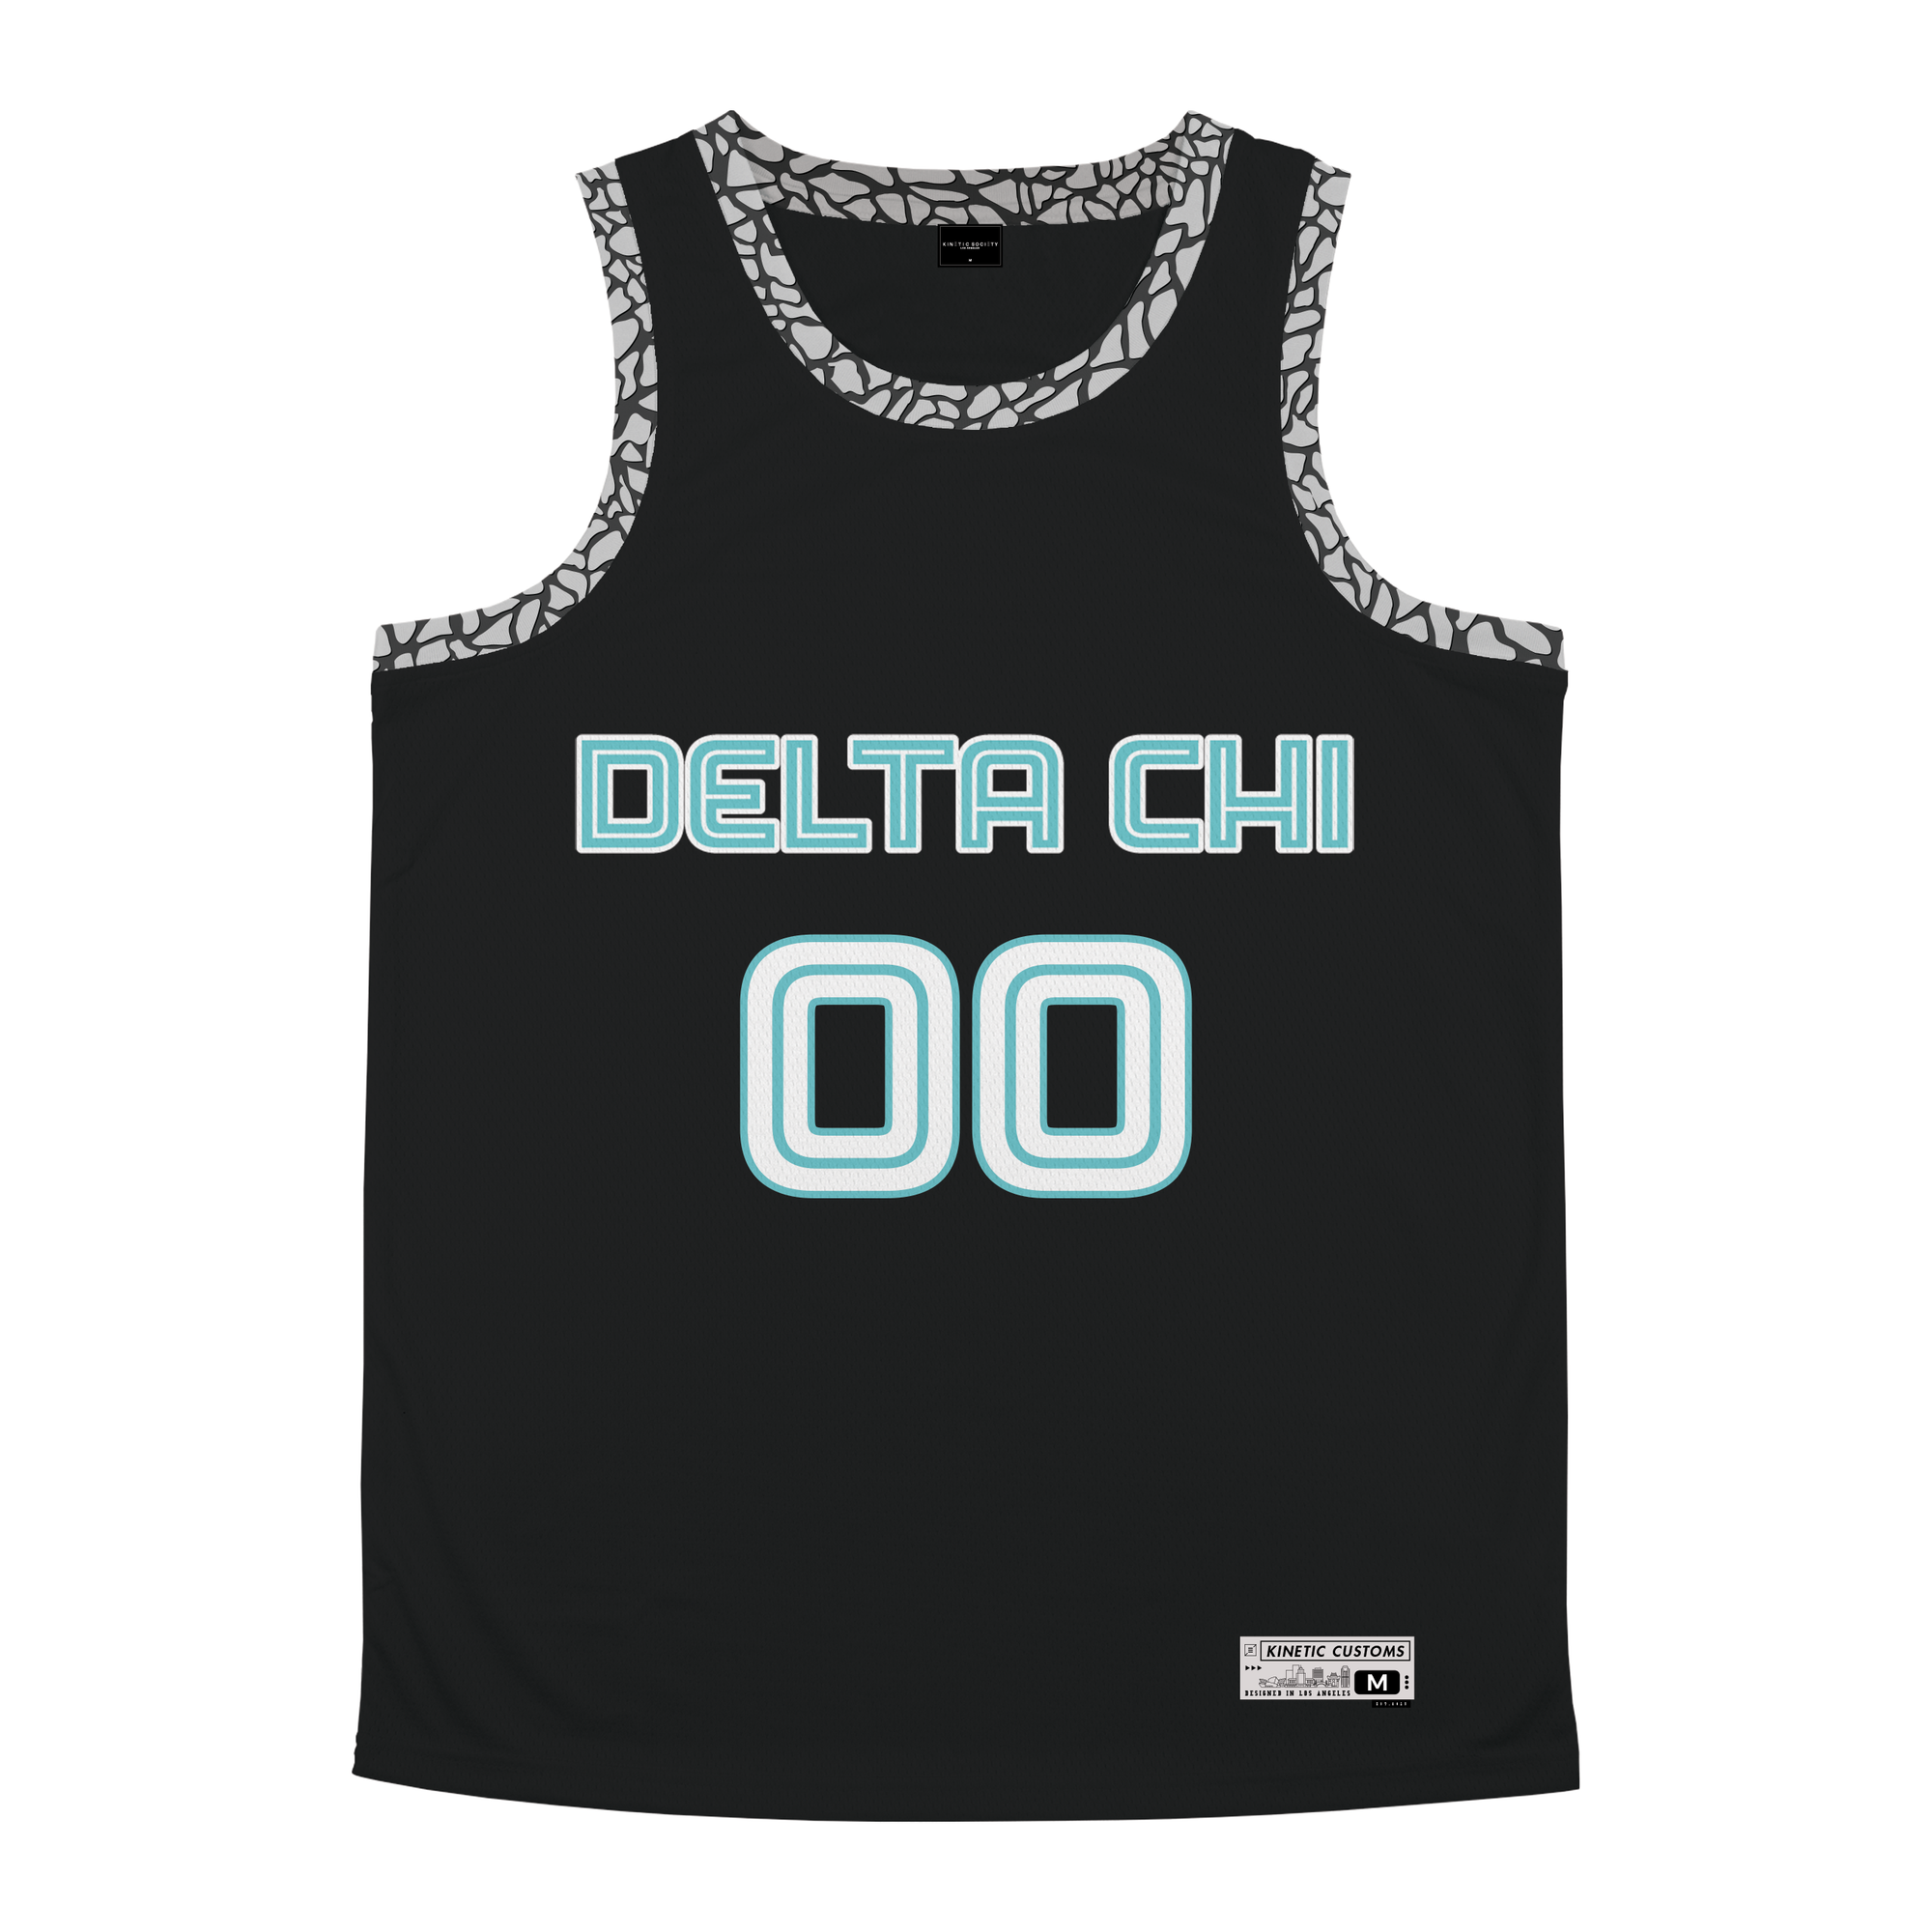 Delta Chi - Cement Basketball Jersey